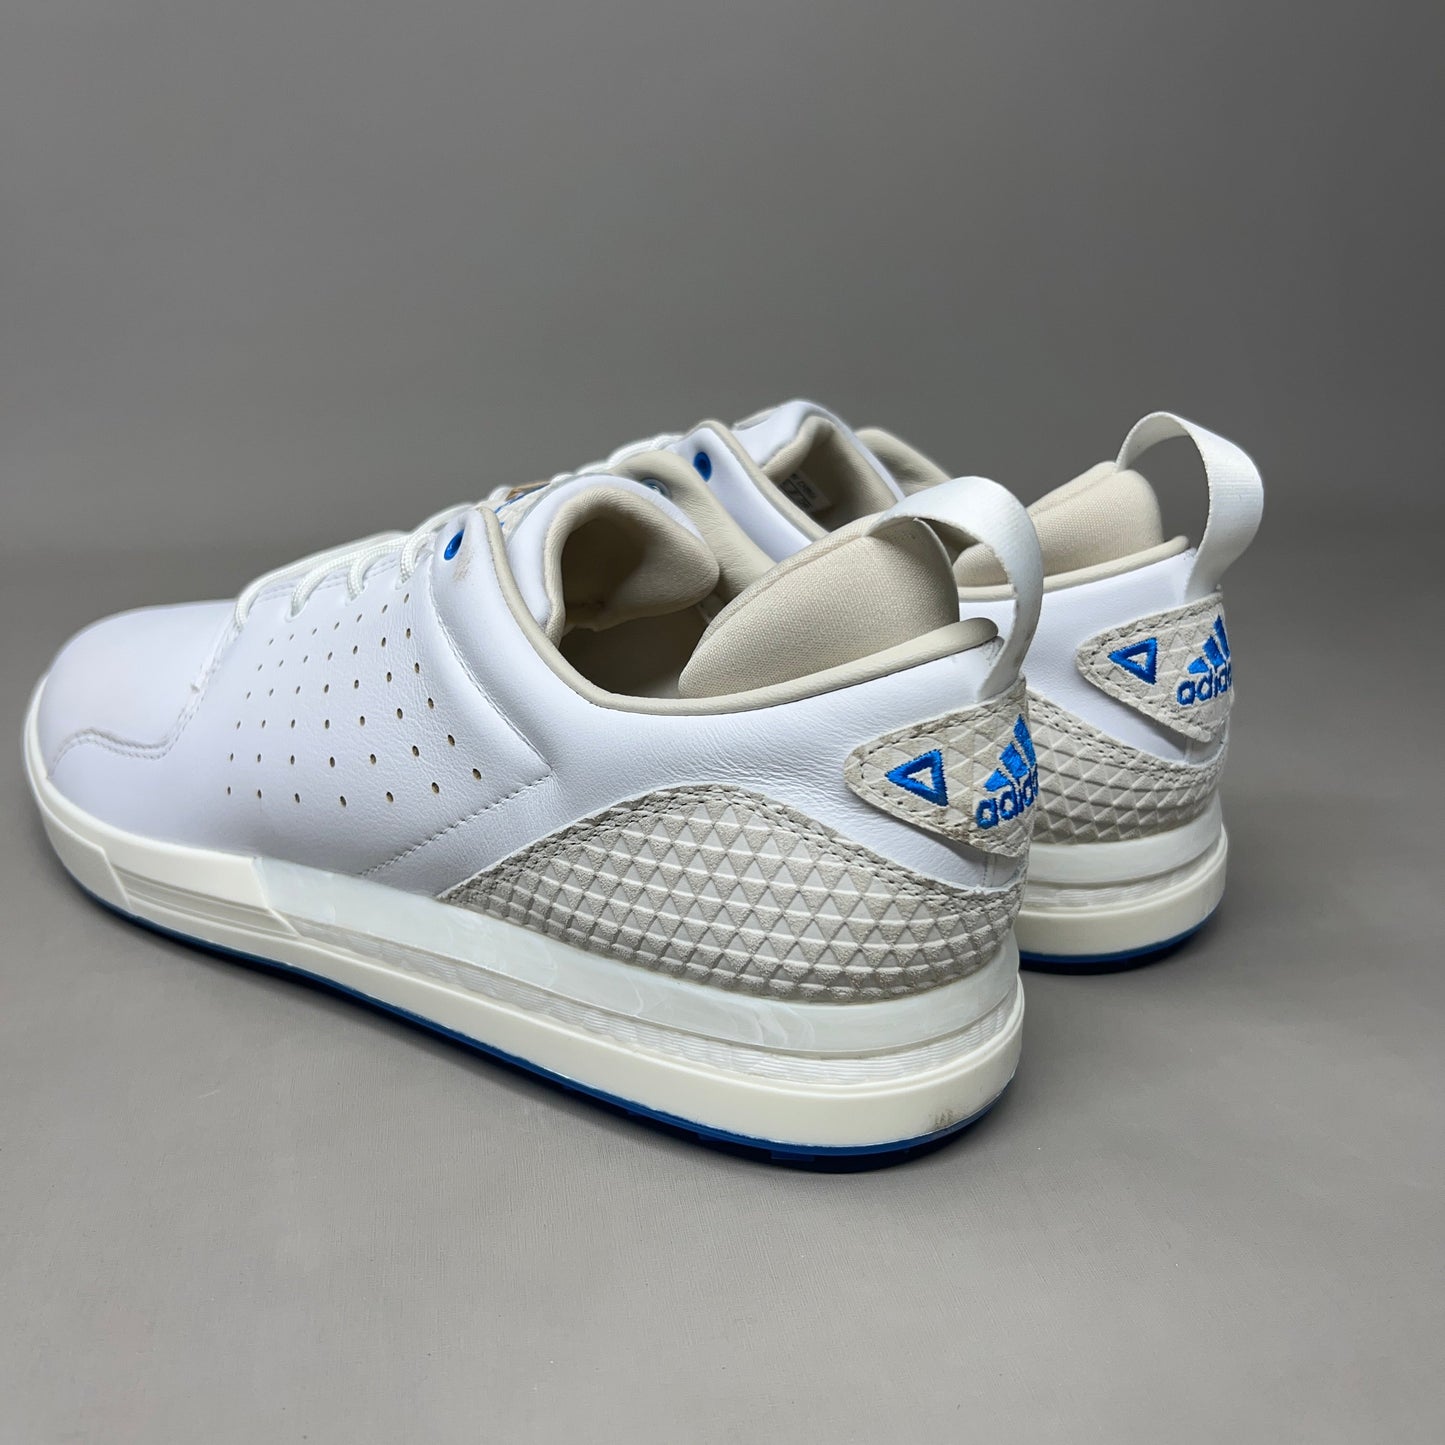 ADIDAS Flopshot Golf Shoes Waterproof Leather Men's Sz 12 White / Gold / Blue GV9668 (New)